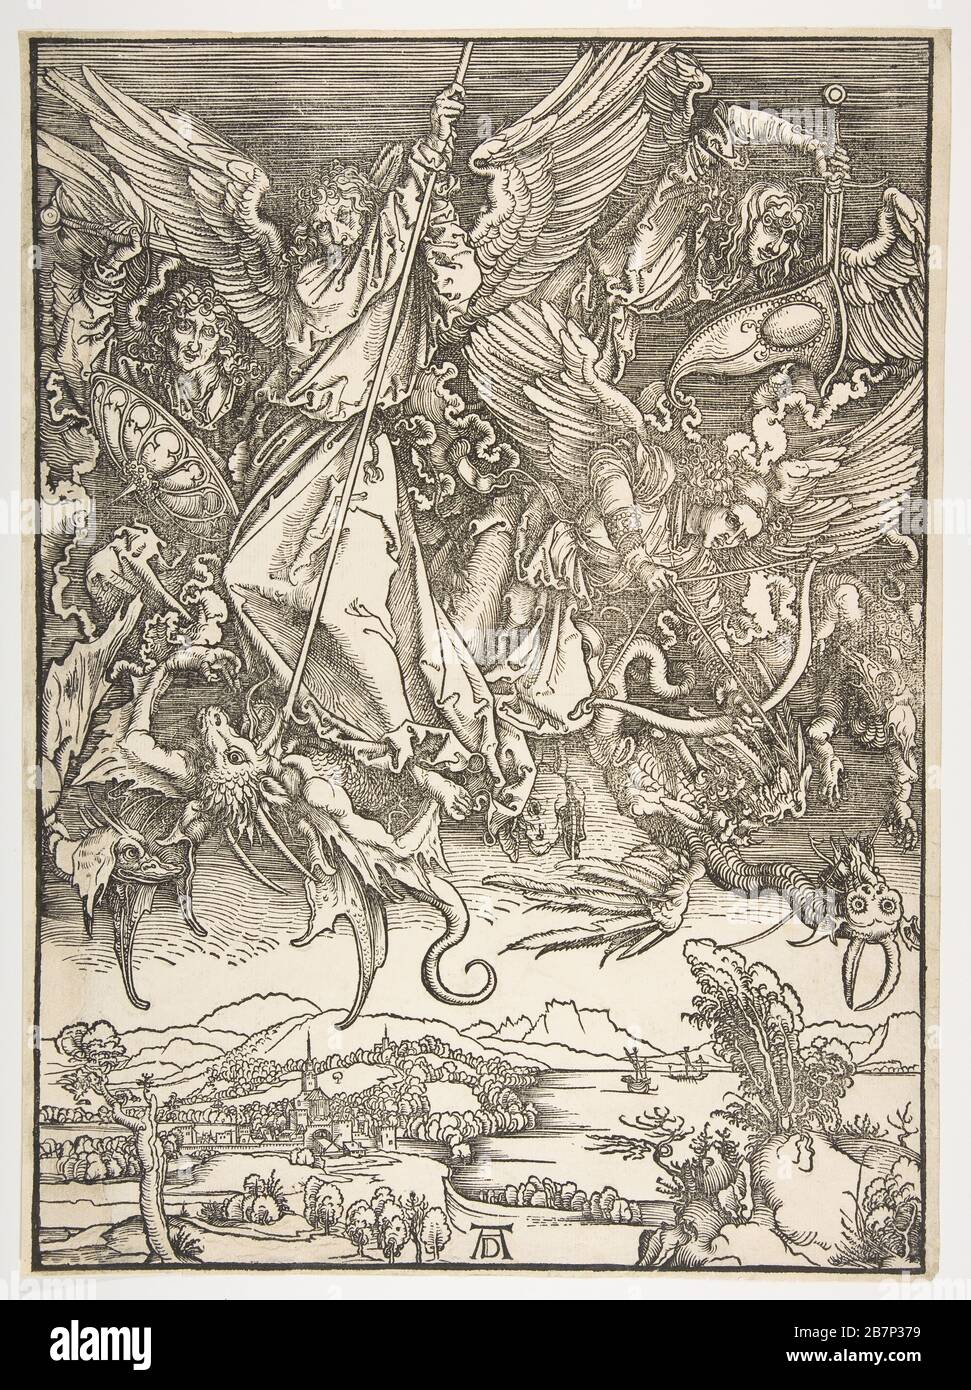 Saint Michael and the Dragon, from The Apocalypse, ca. 1498. Stock Photo